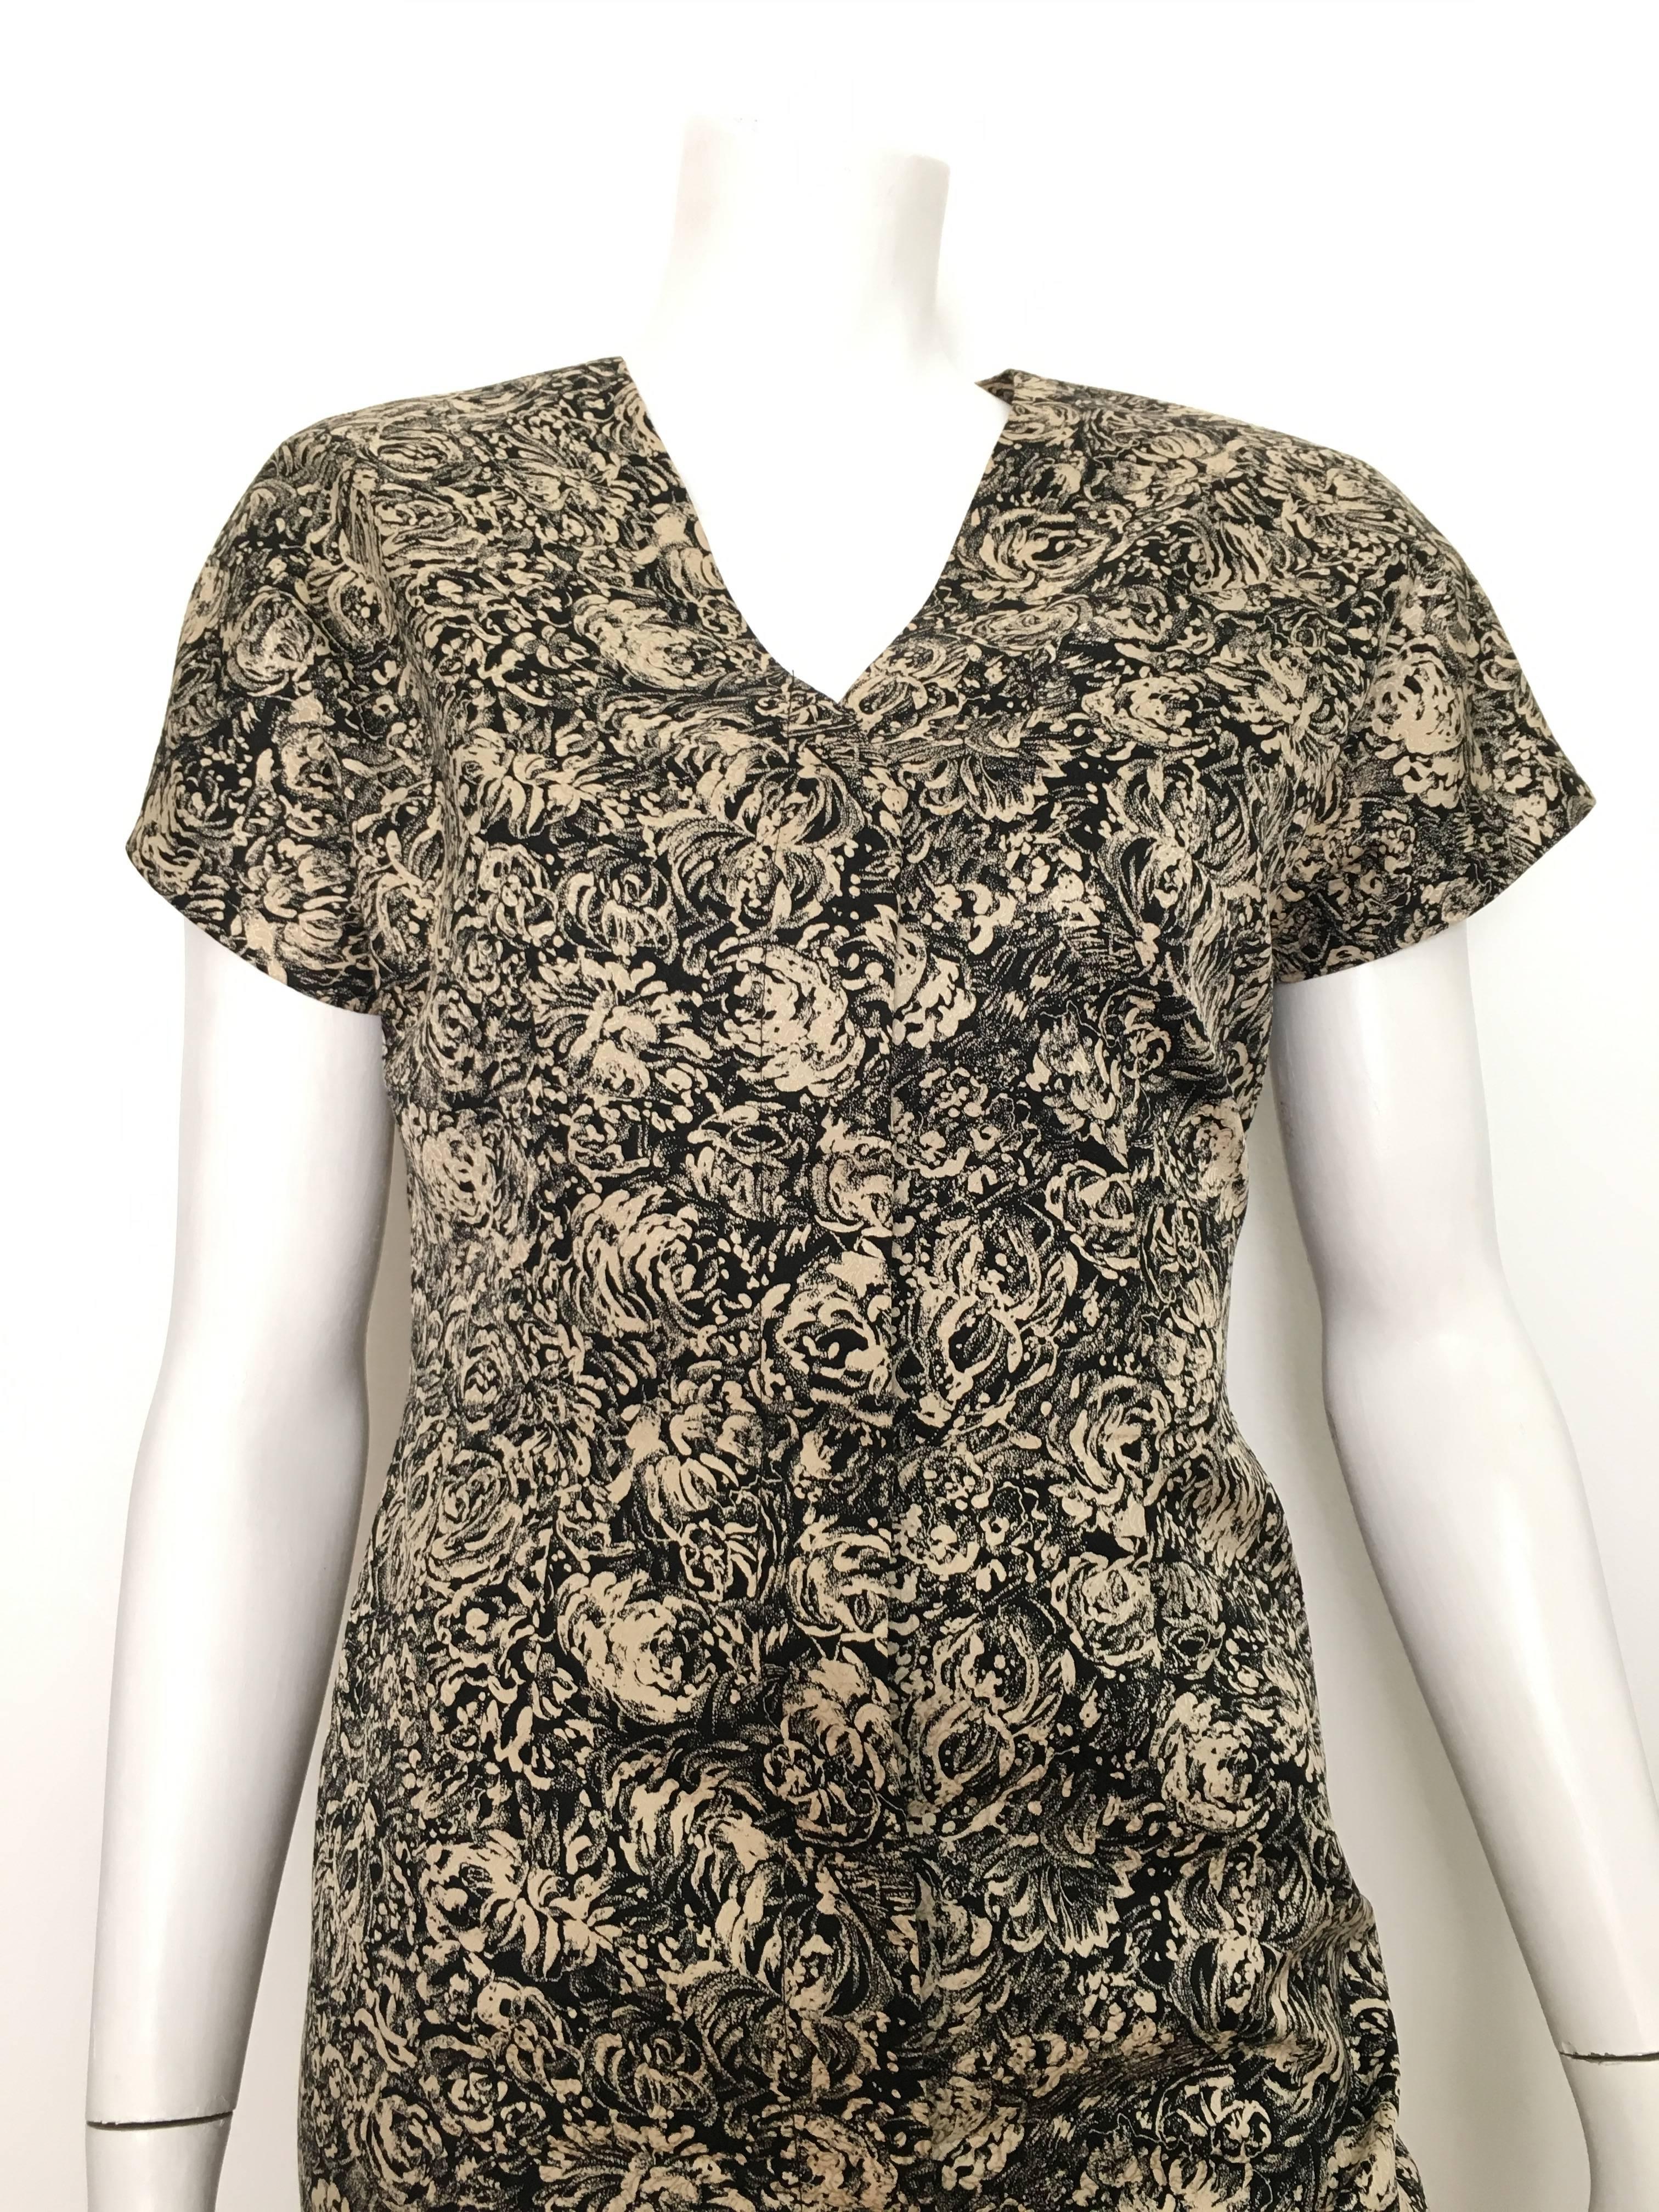 Bill Blass 1980s silk button up short sleeve dress with rose pattern is a size 6. Ladies please use your measuring tape so you can properly measure your bust, waist &  hips to make sure this vintage treasure will fit your lovely body to perfection. 